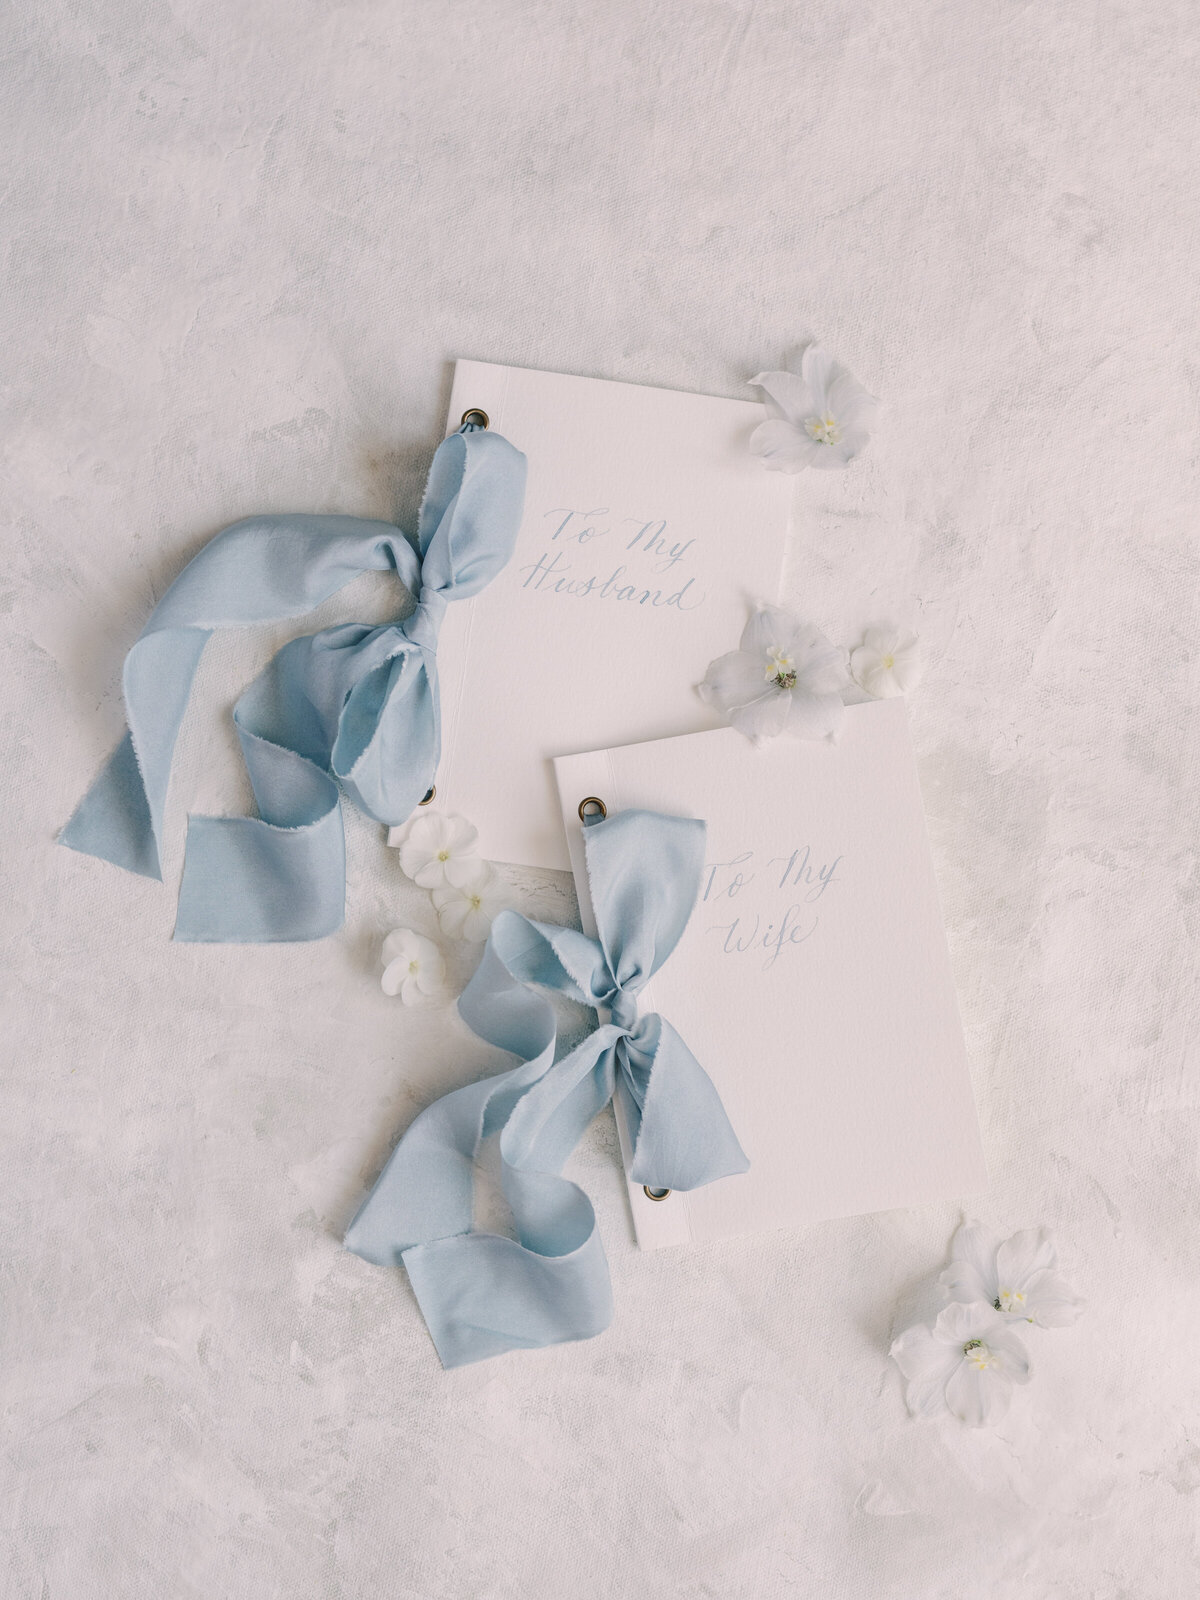 Custom Voew Books tied together with dusty blue satin ribbon